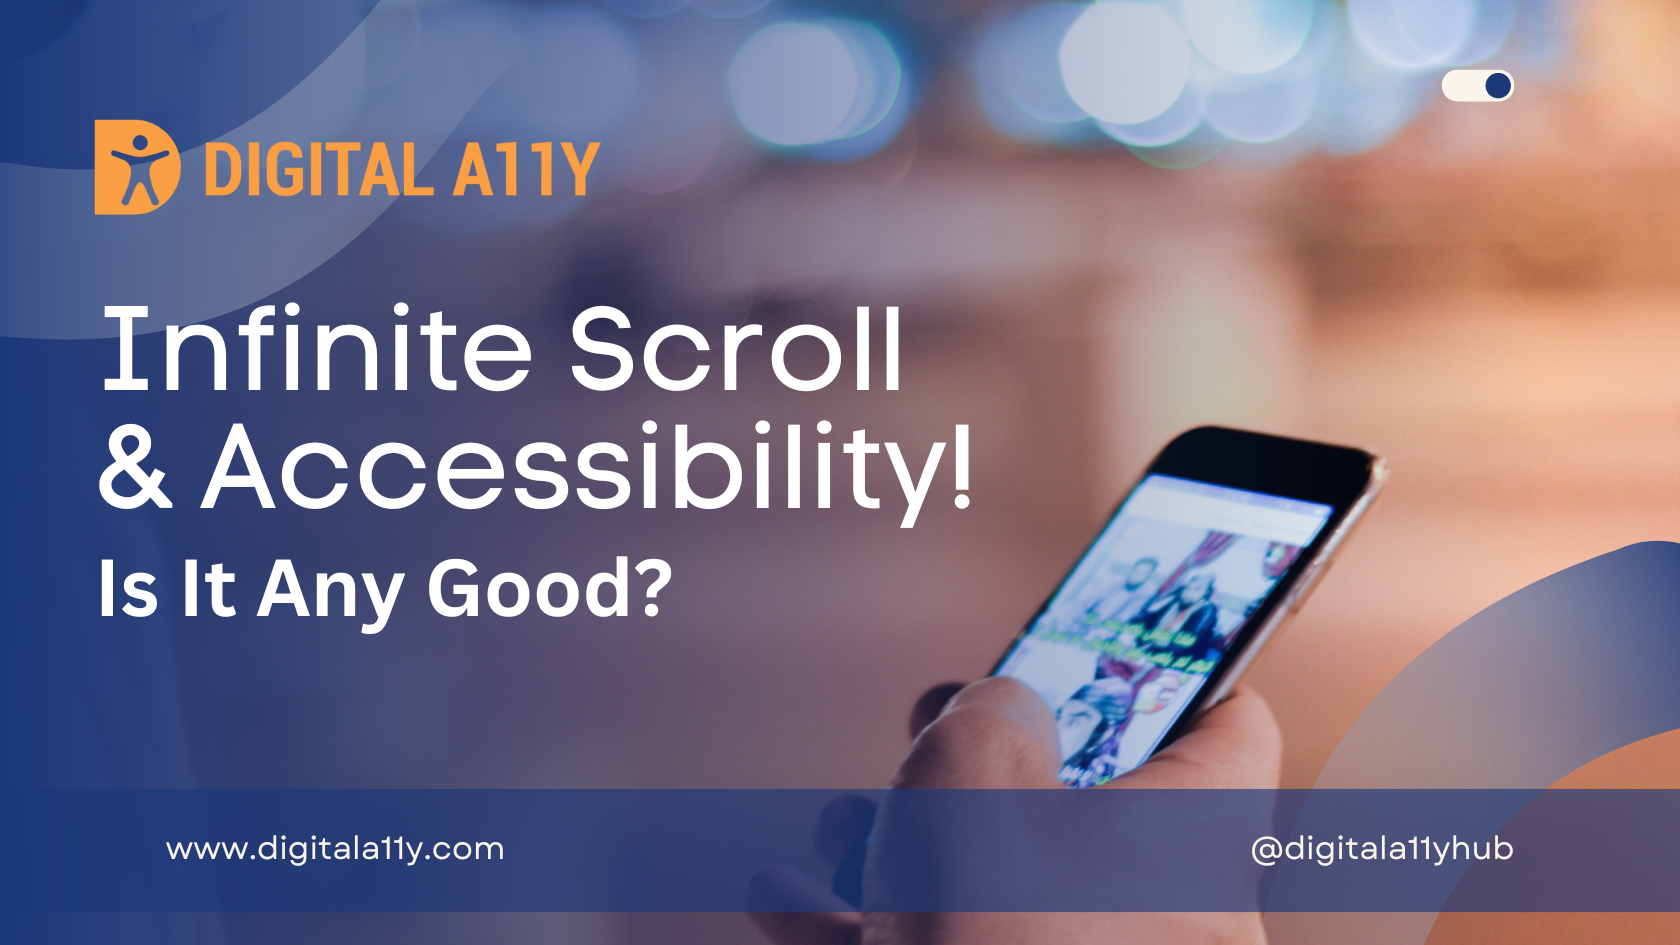 Infinite Scroll & Accessibility! Is It Any Good?